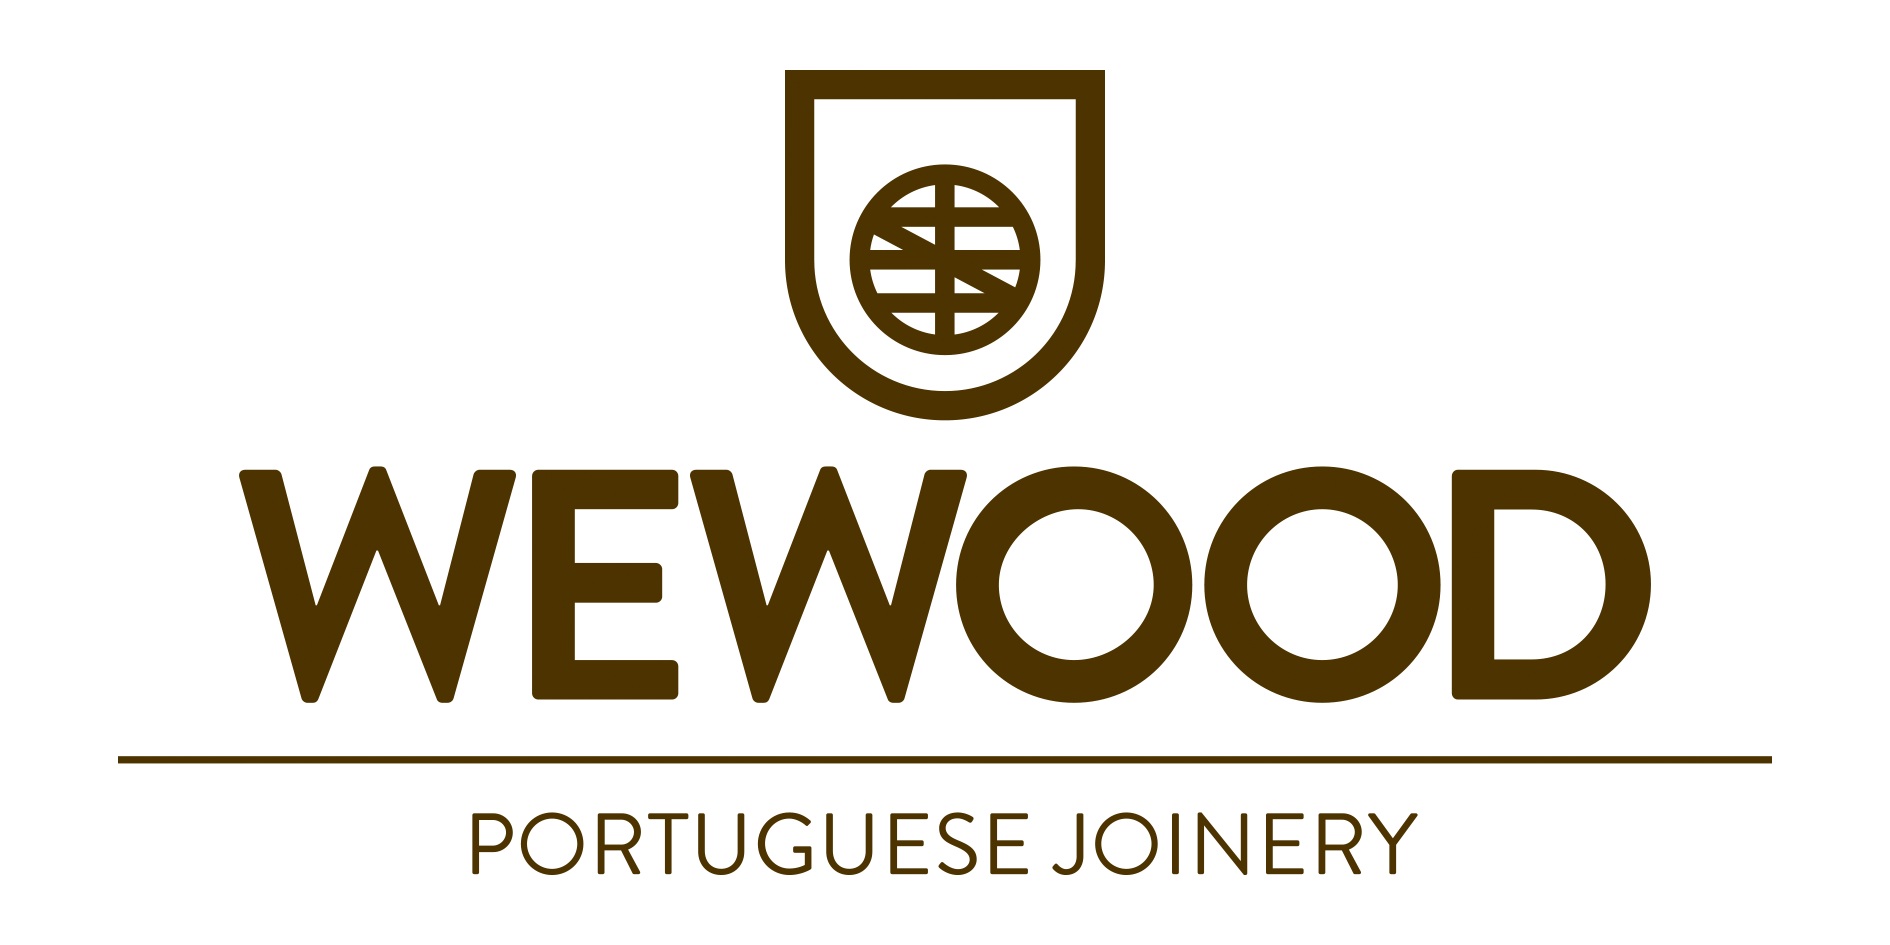 Wewood - Portuguese Joinery | Timeless Furniture Design